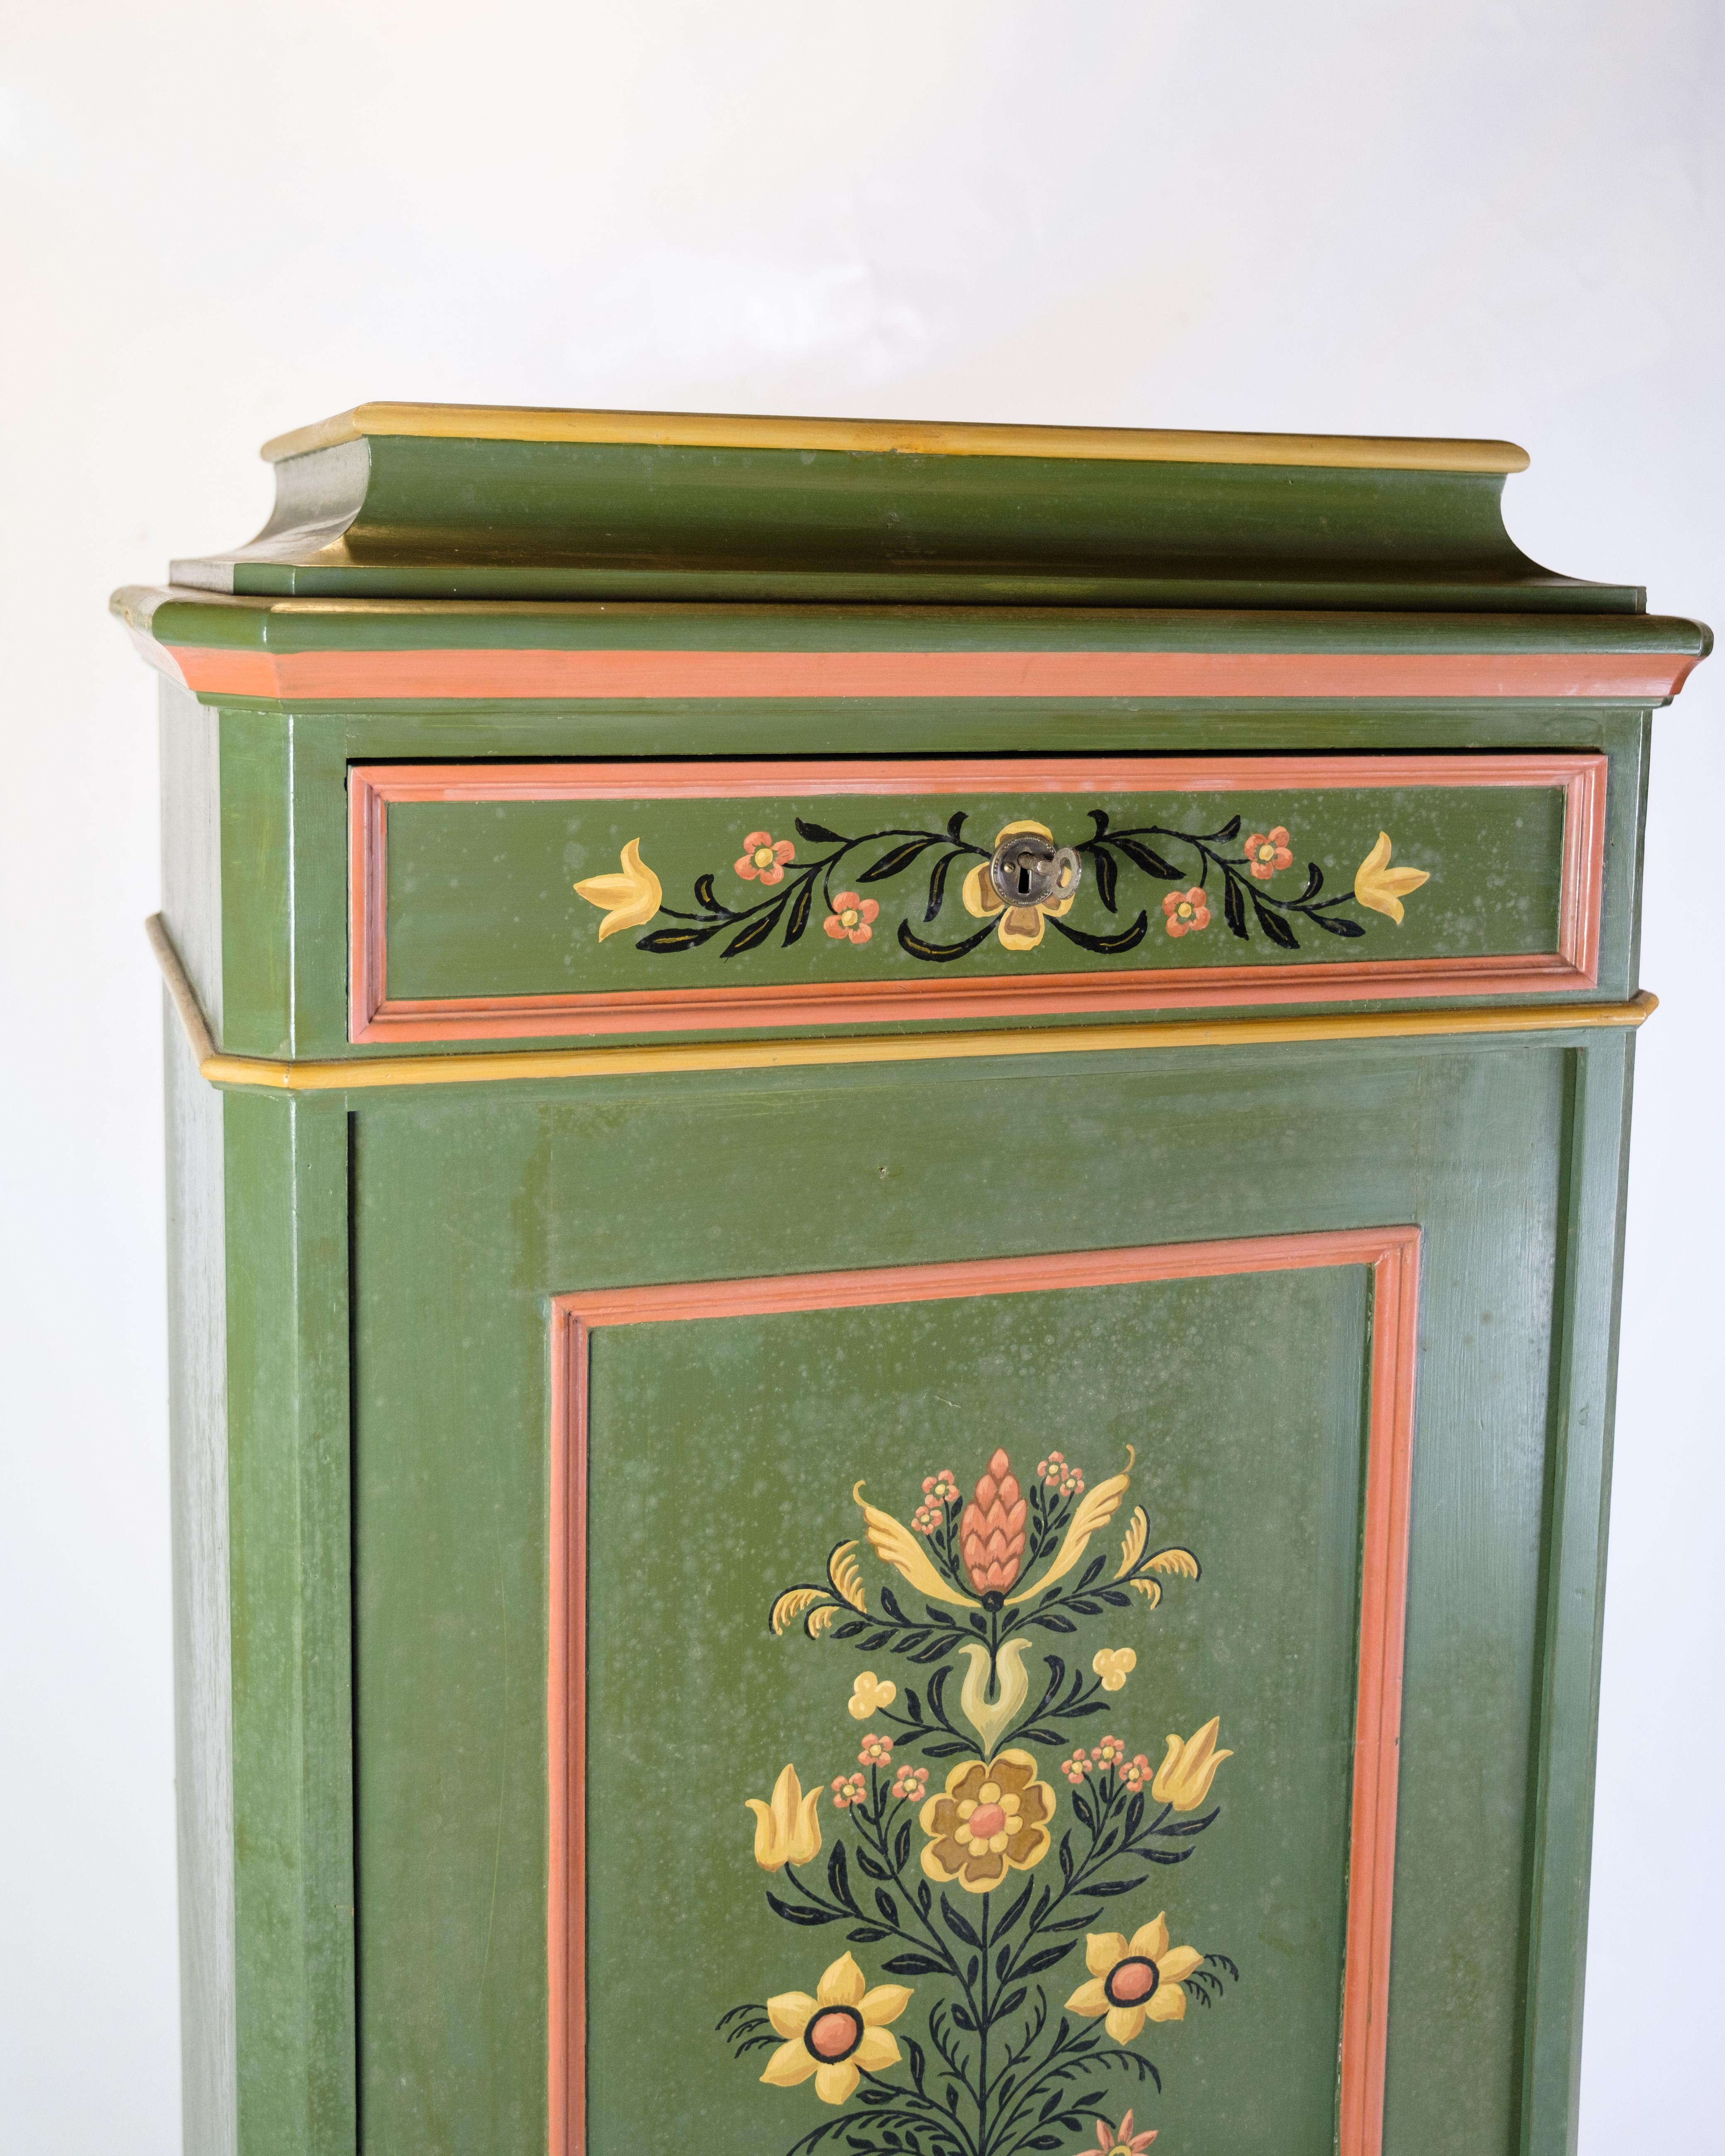 This antique cabinet from around 1890 is a splendid example of historic craftsmanship and aesthetics. Hand-painted with a beautiful flower decoration, the cabinet exudes a timeless charm and elegance. The carefully executed decoration adds a touch